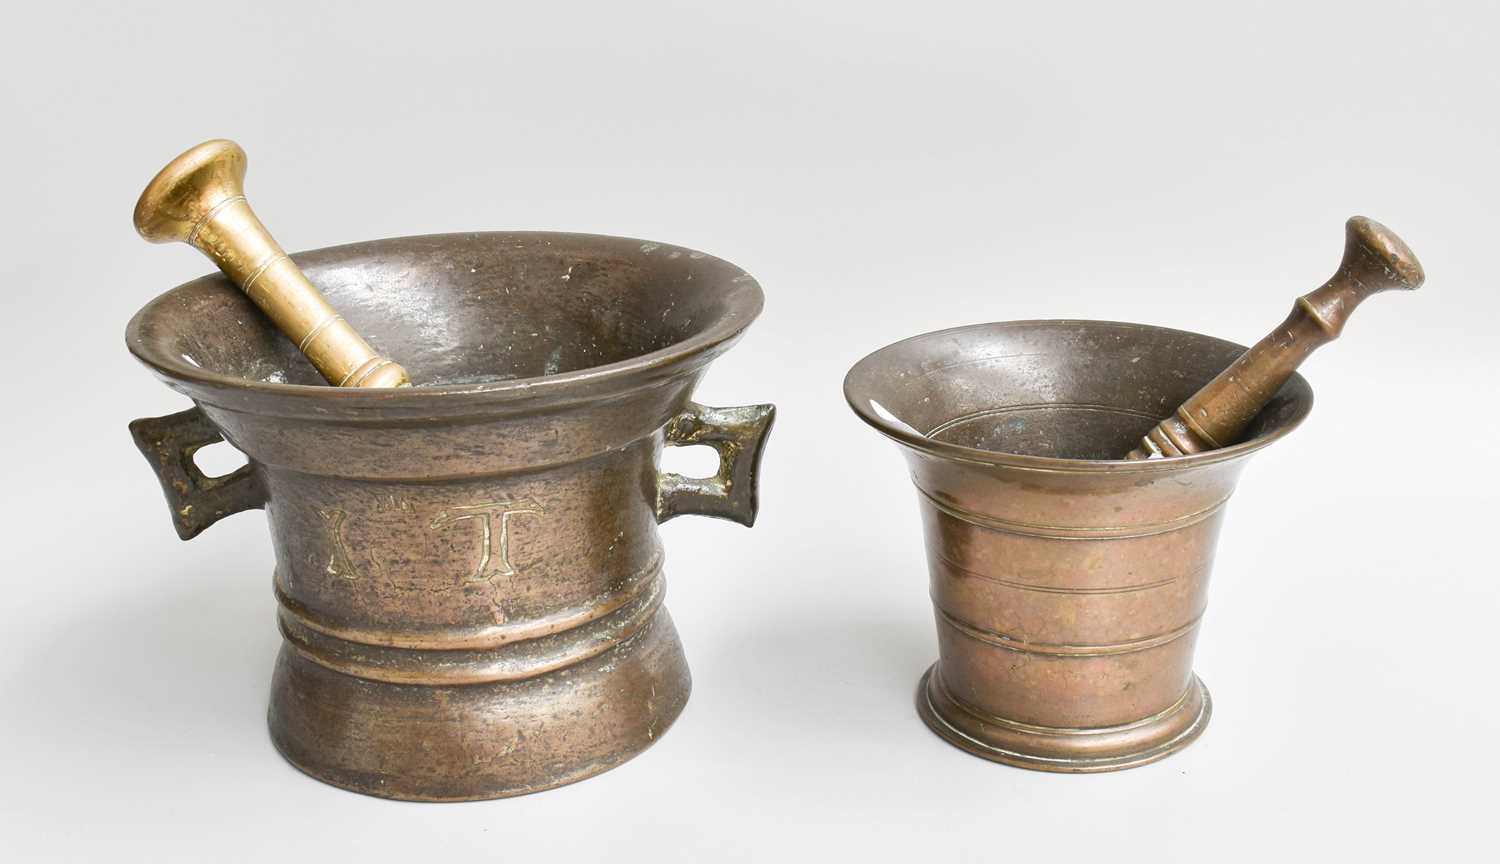 A 17th Century Twin-Handled Bronze Mortar, one side engraved "I.T.", the other brazed with an "A",